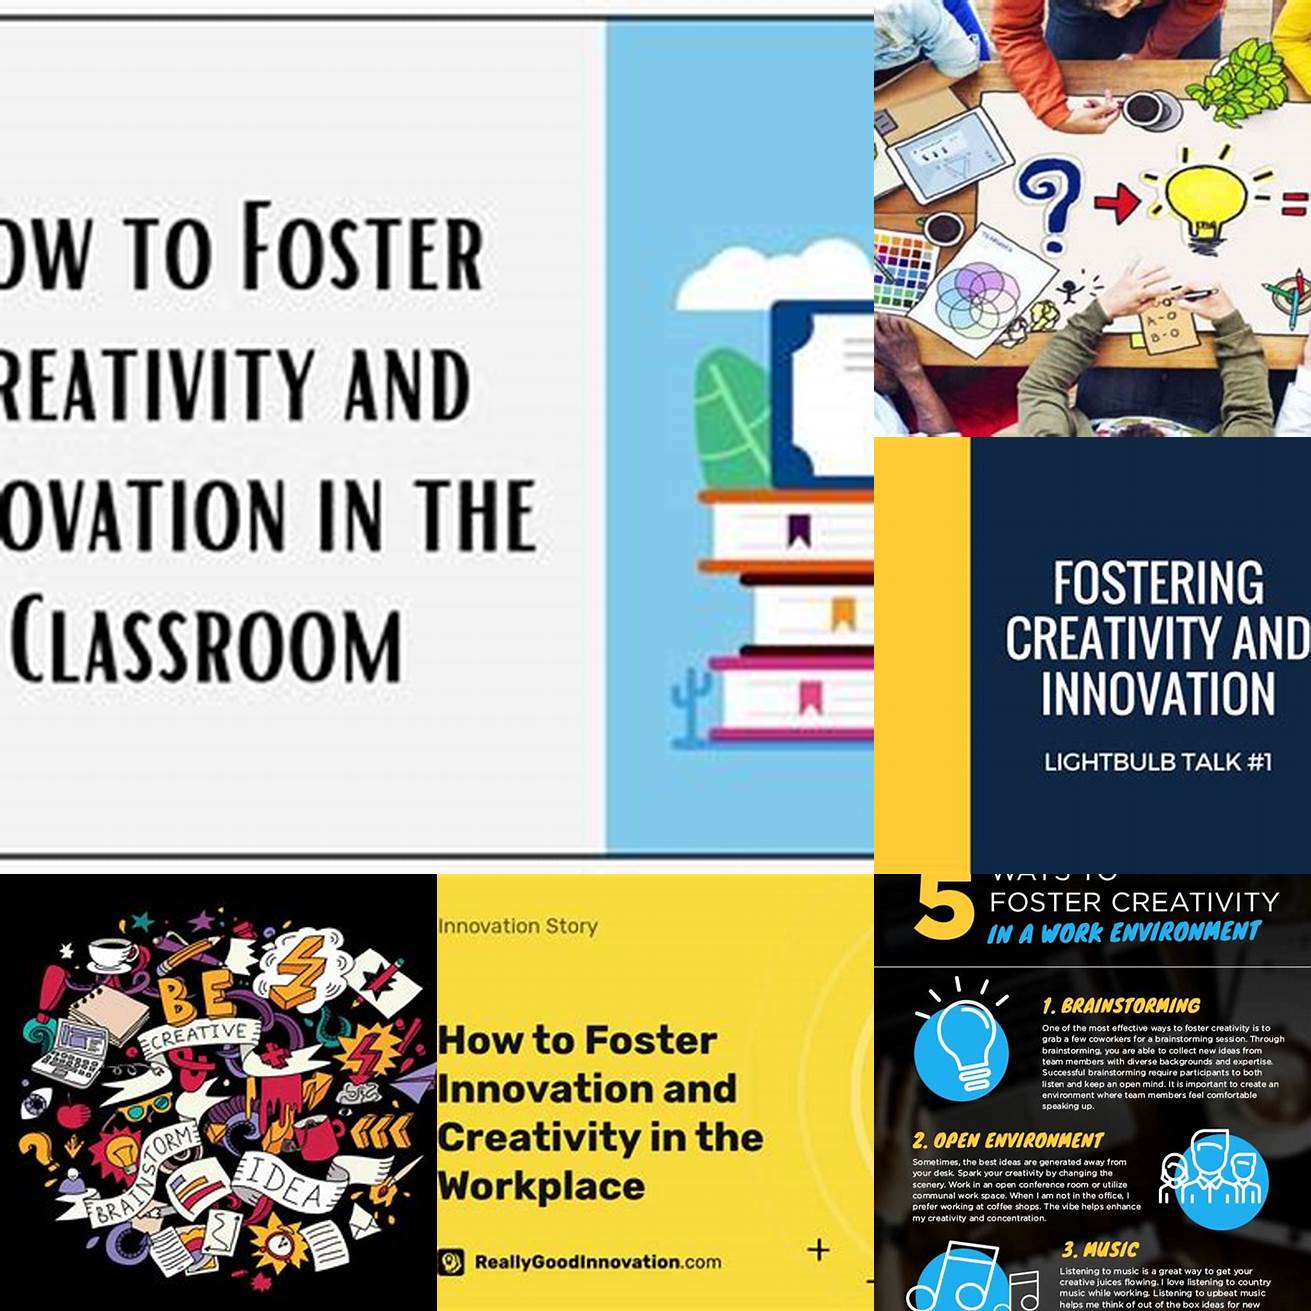 Fosters creativity and innovation